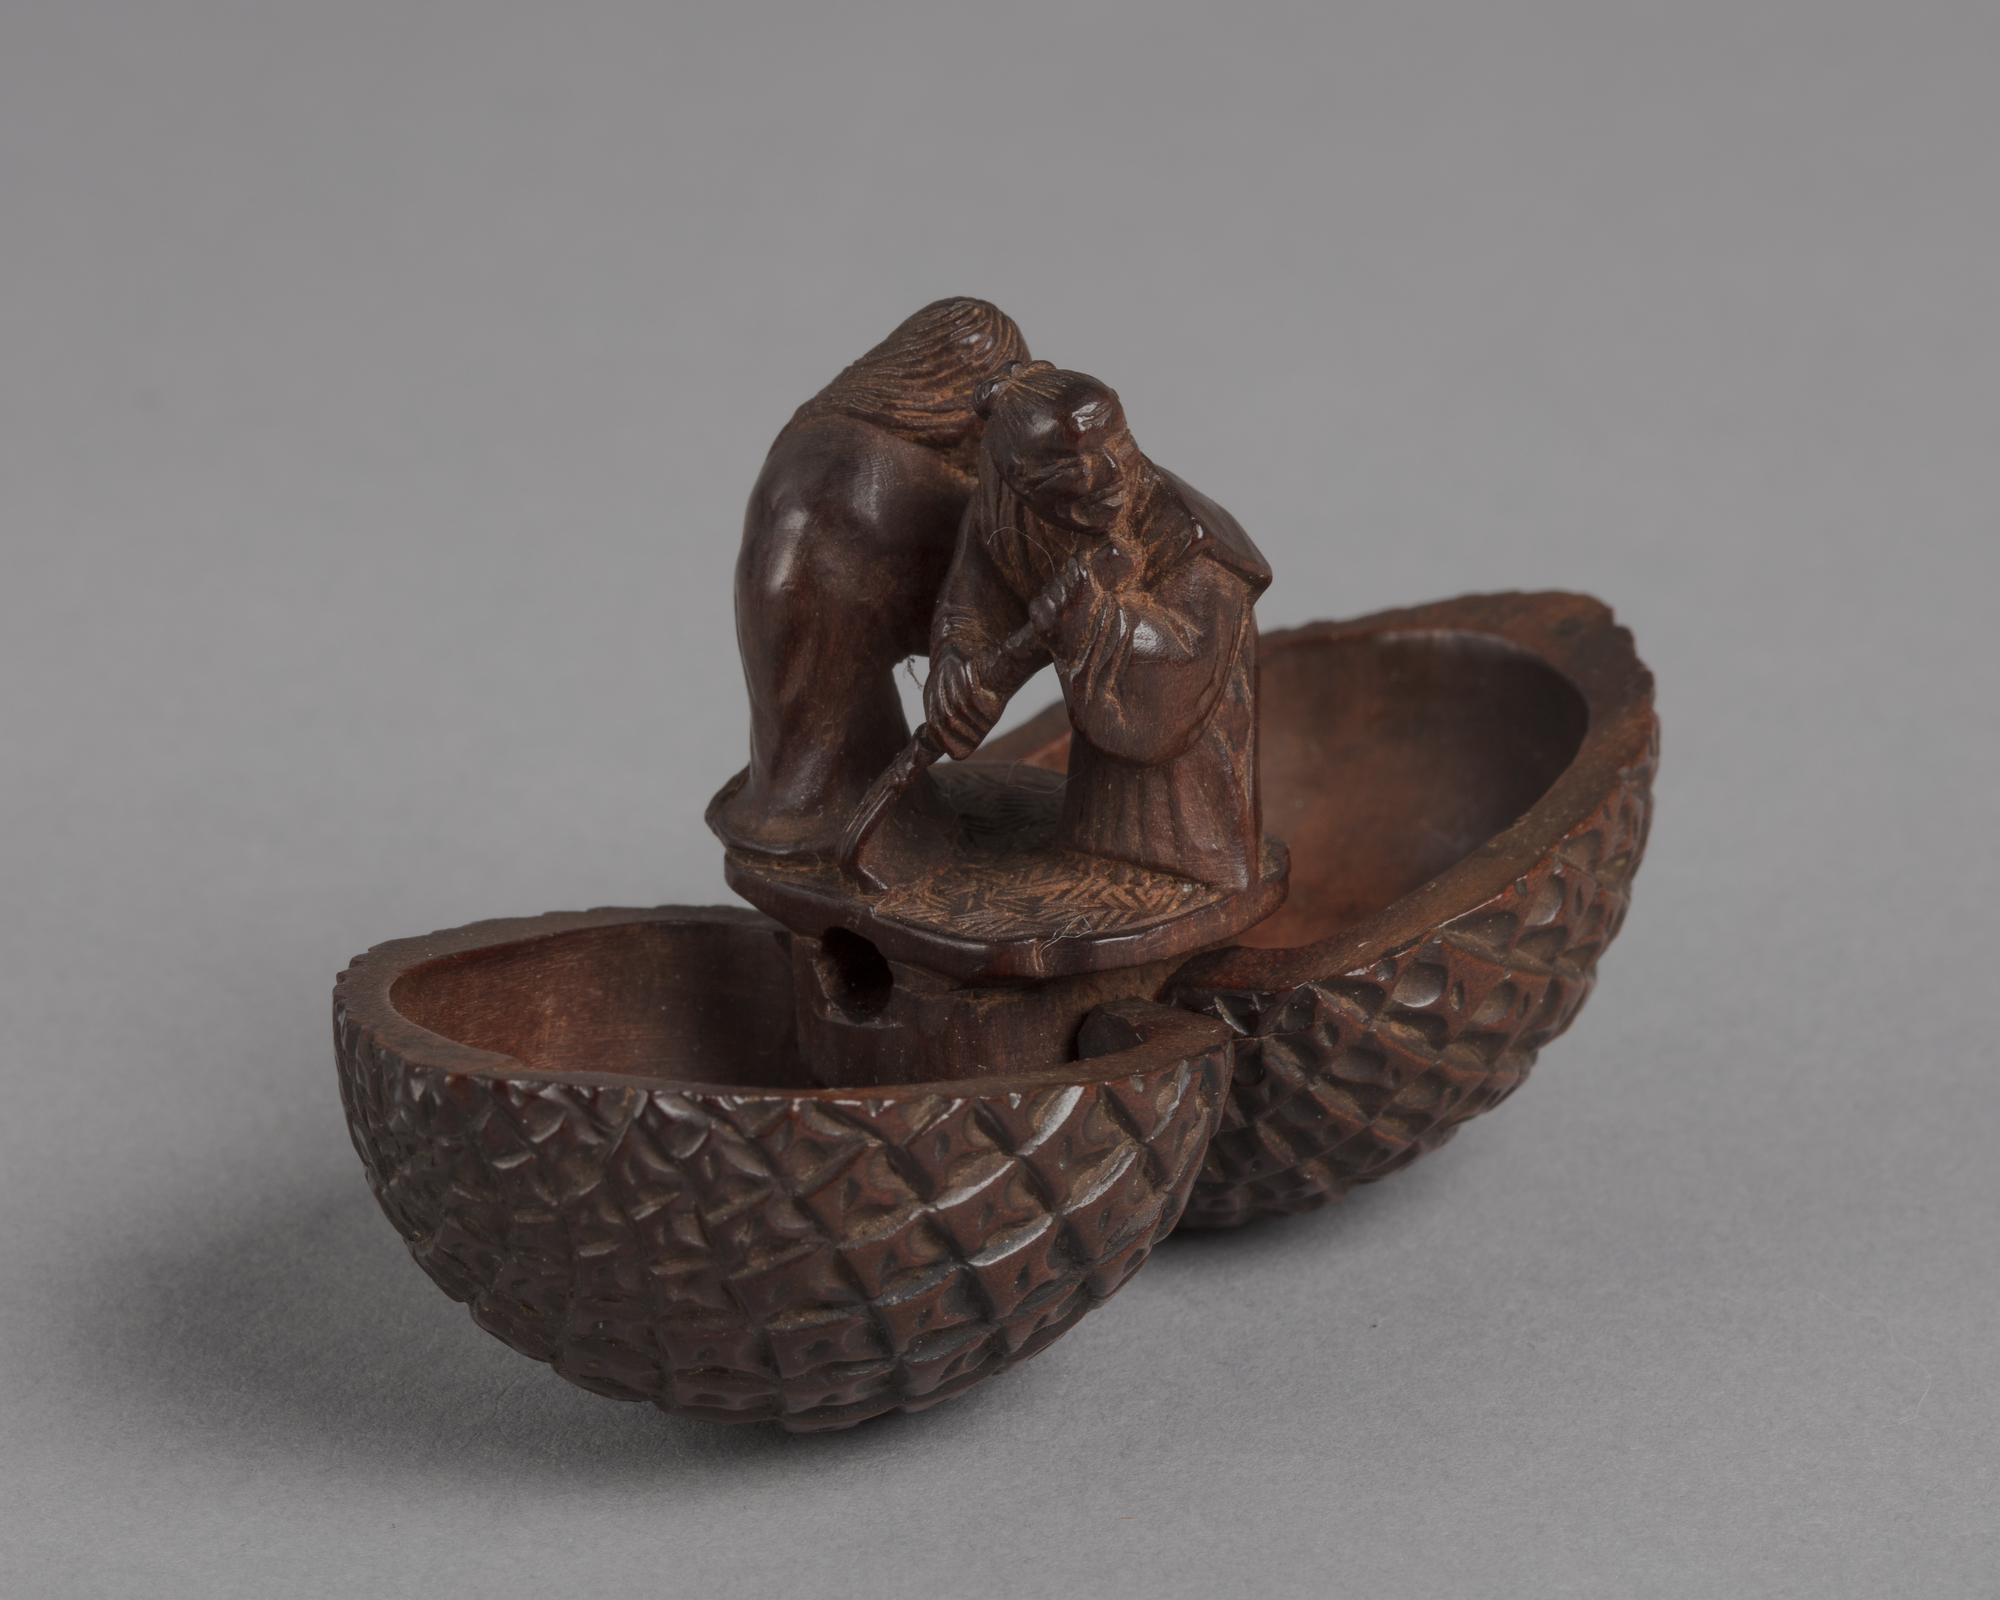 A Japanese boxwood netsuke of a pinecone which opens vertically to reveal a small man and woman standing inside.